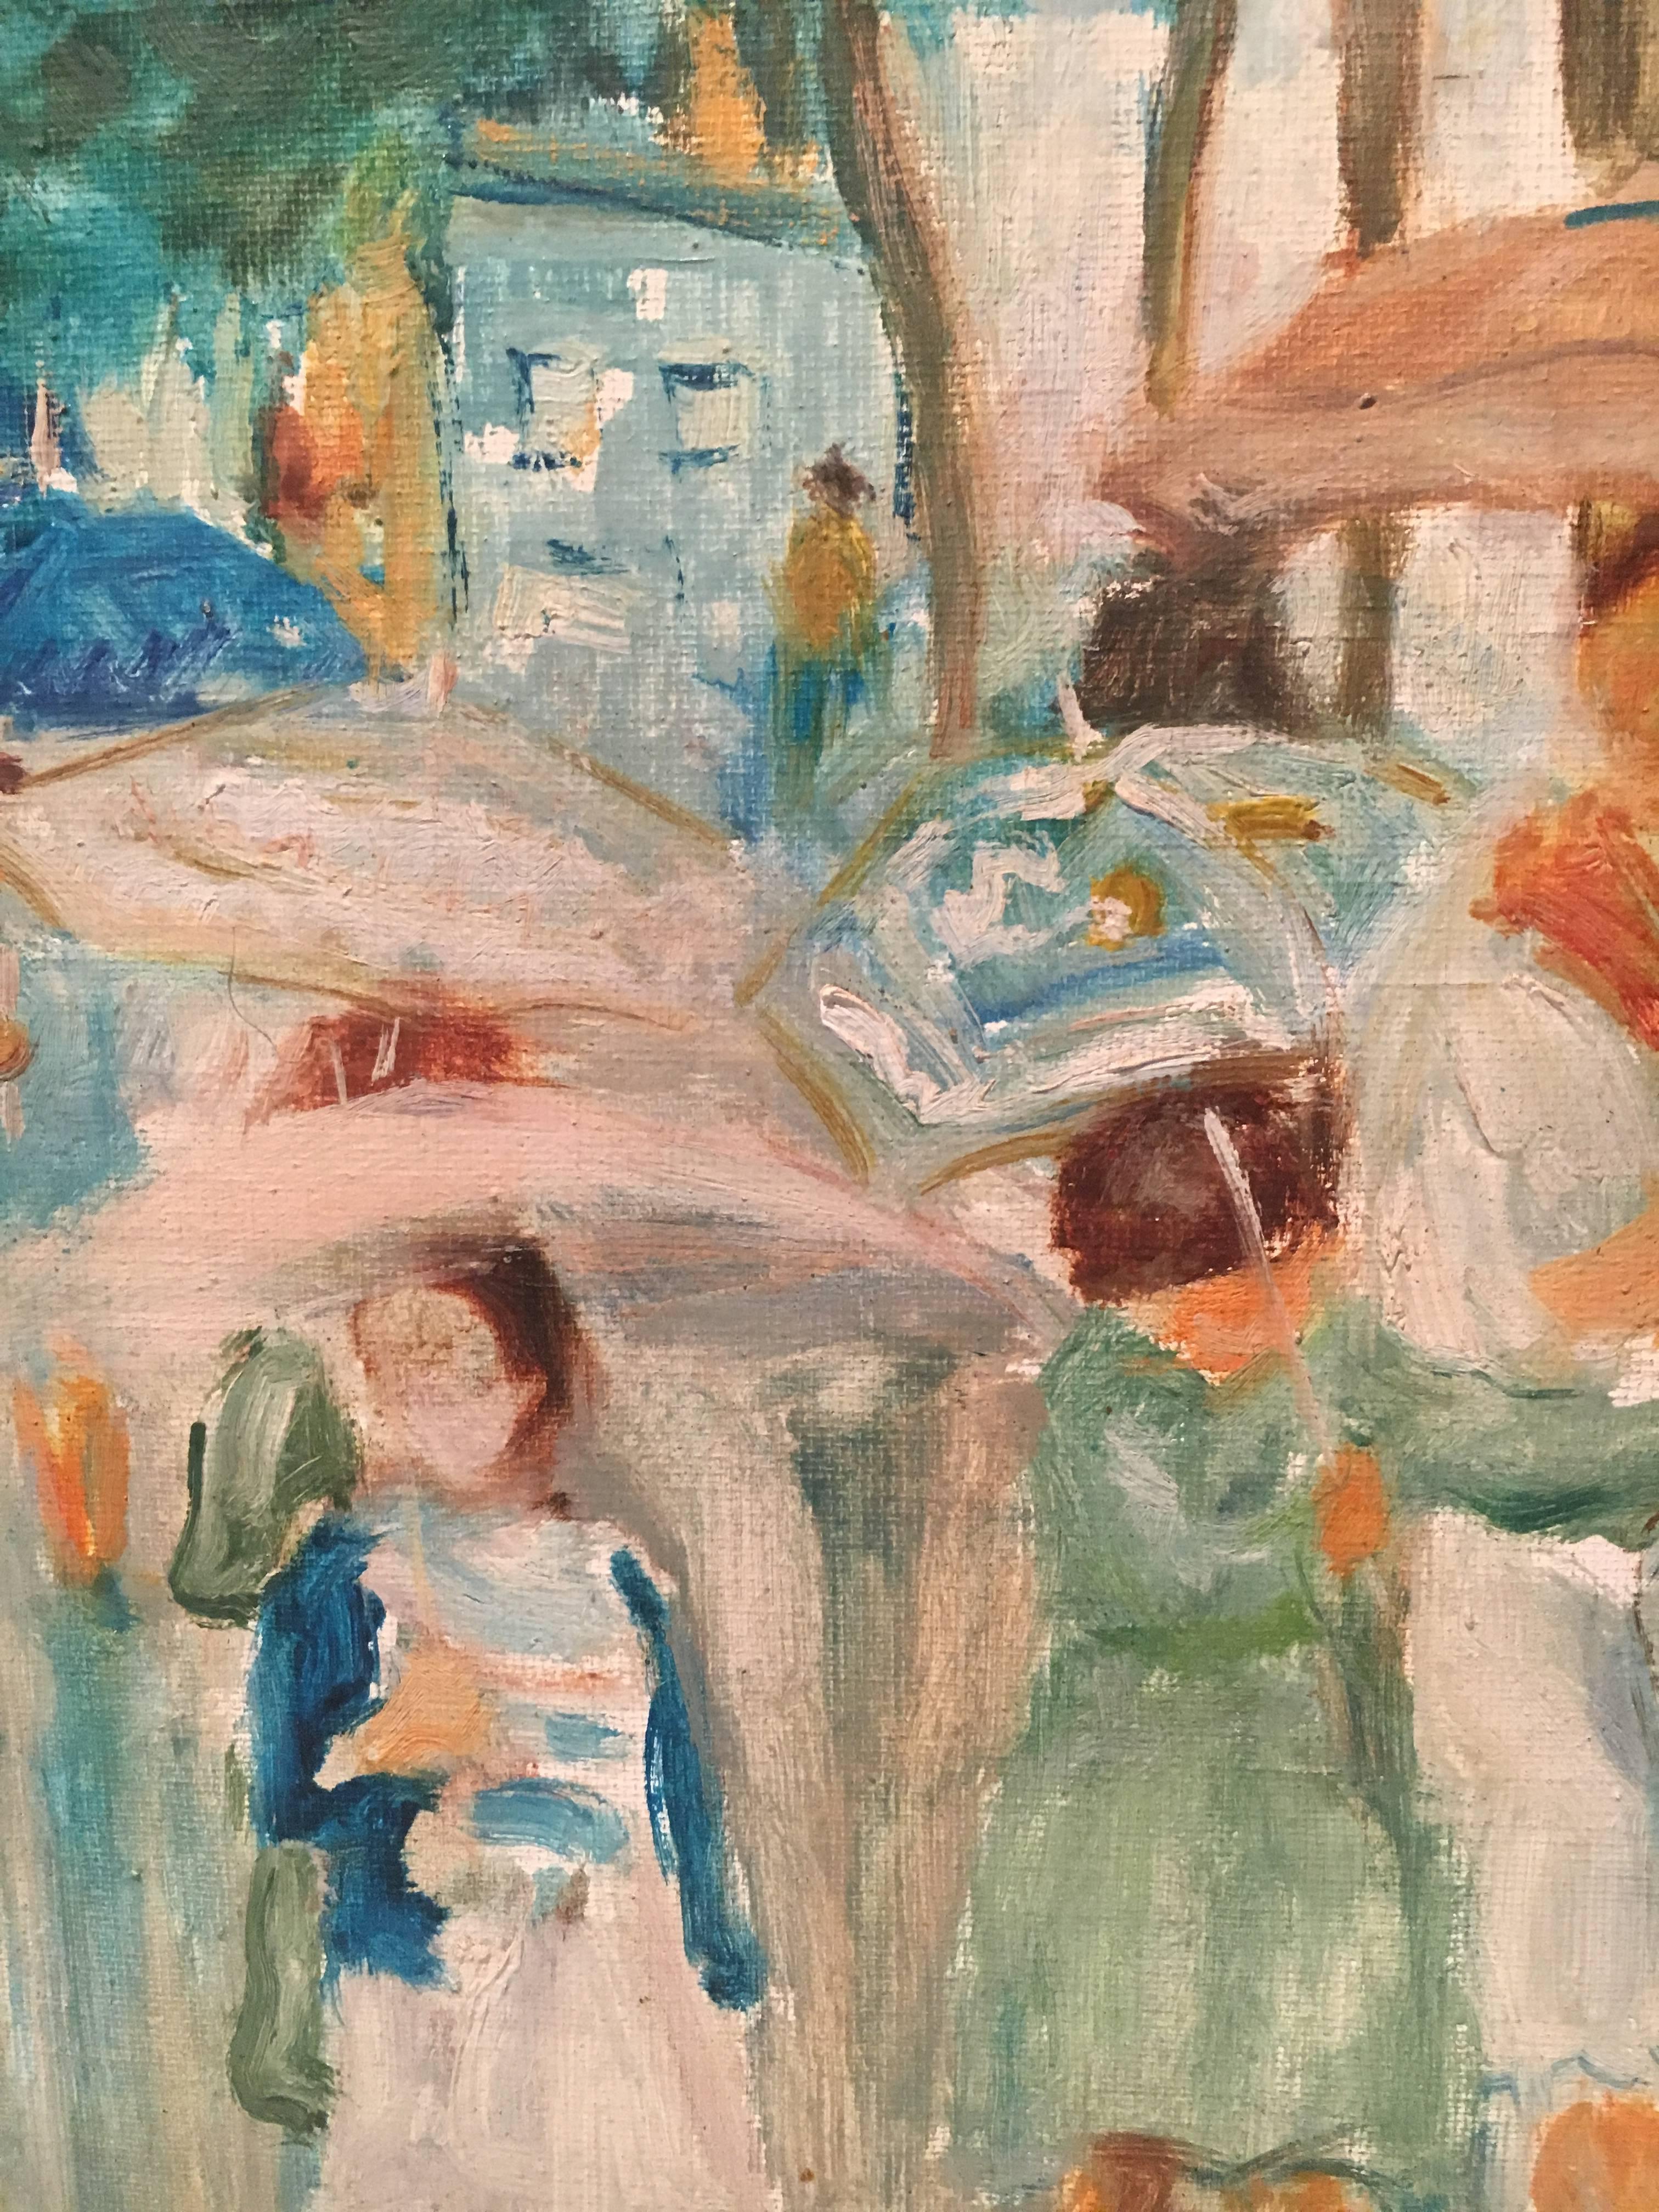 Spanish Charming Impressionist Painting of Women and Children in the Rain